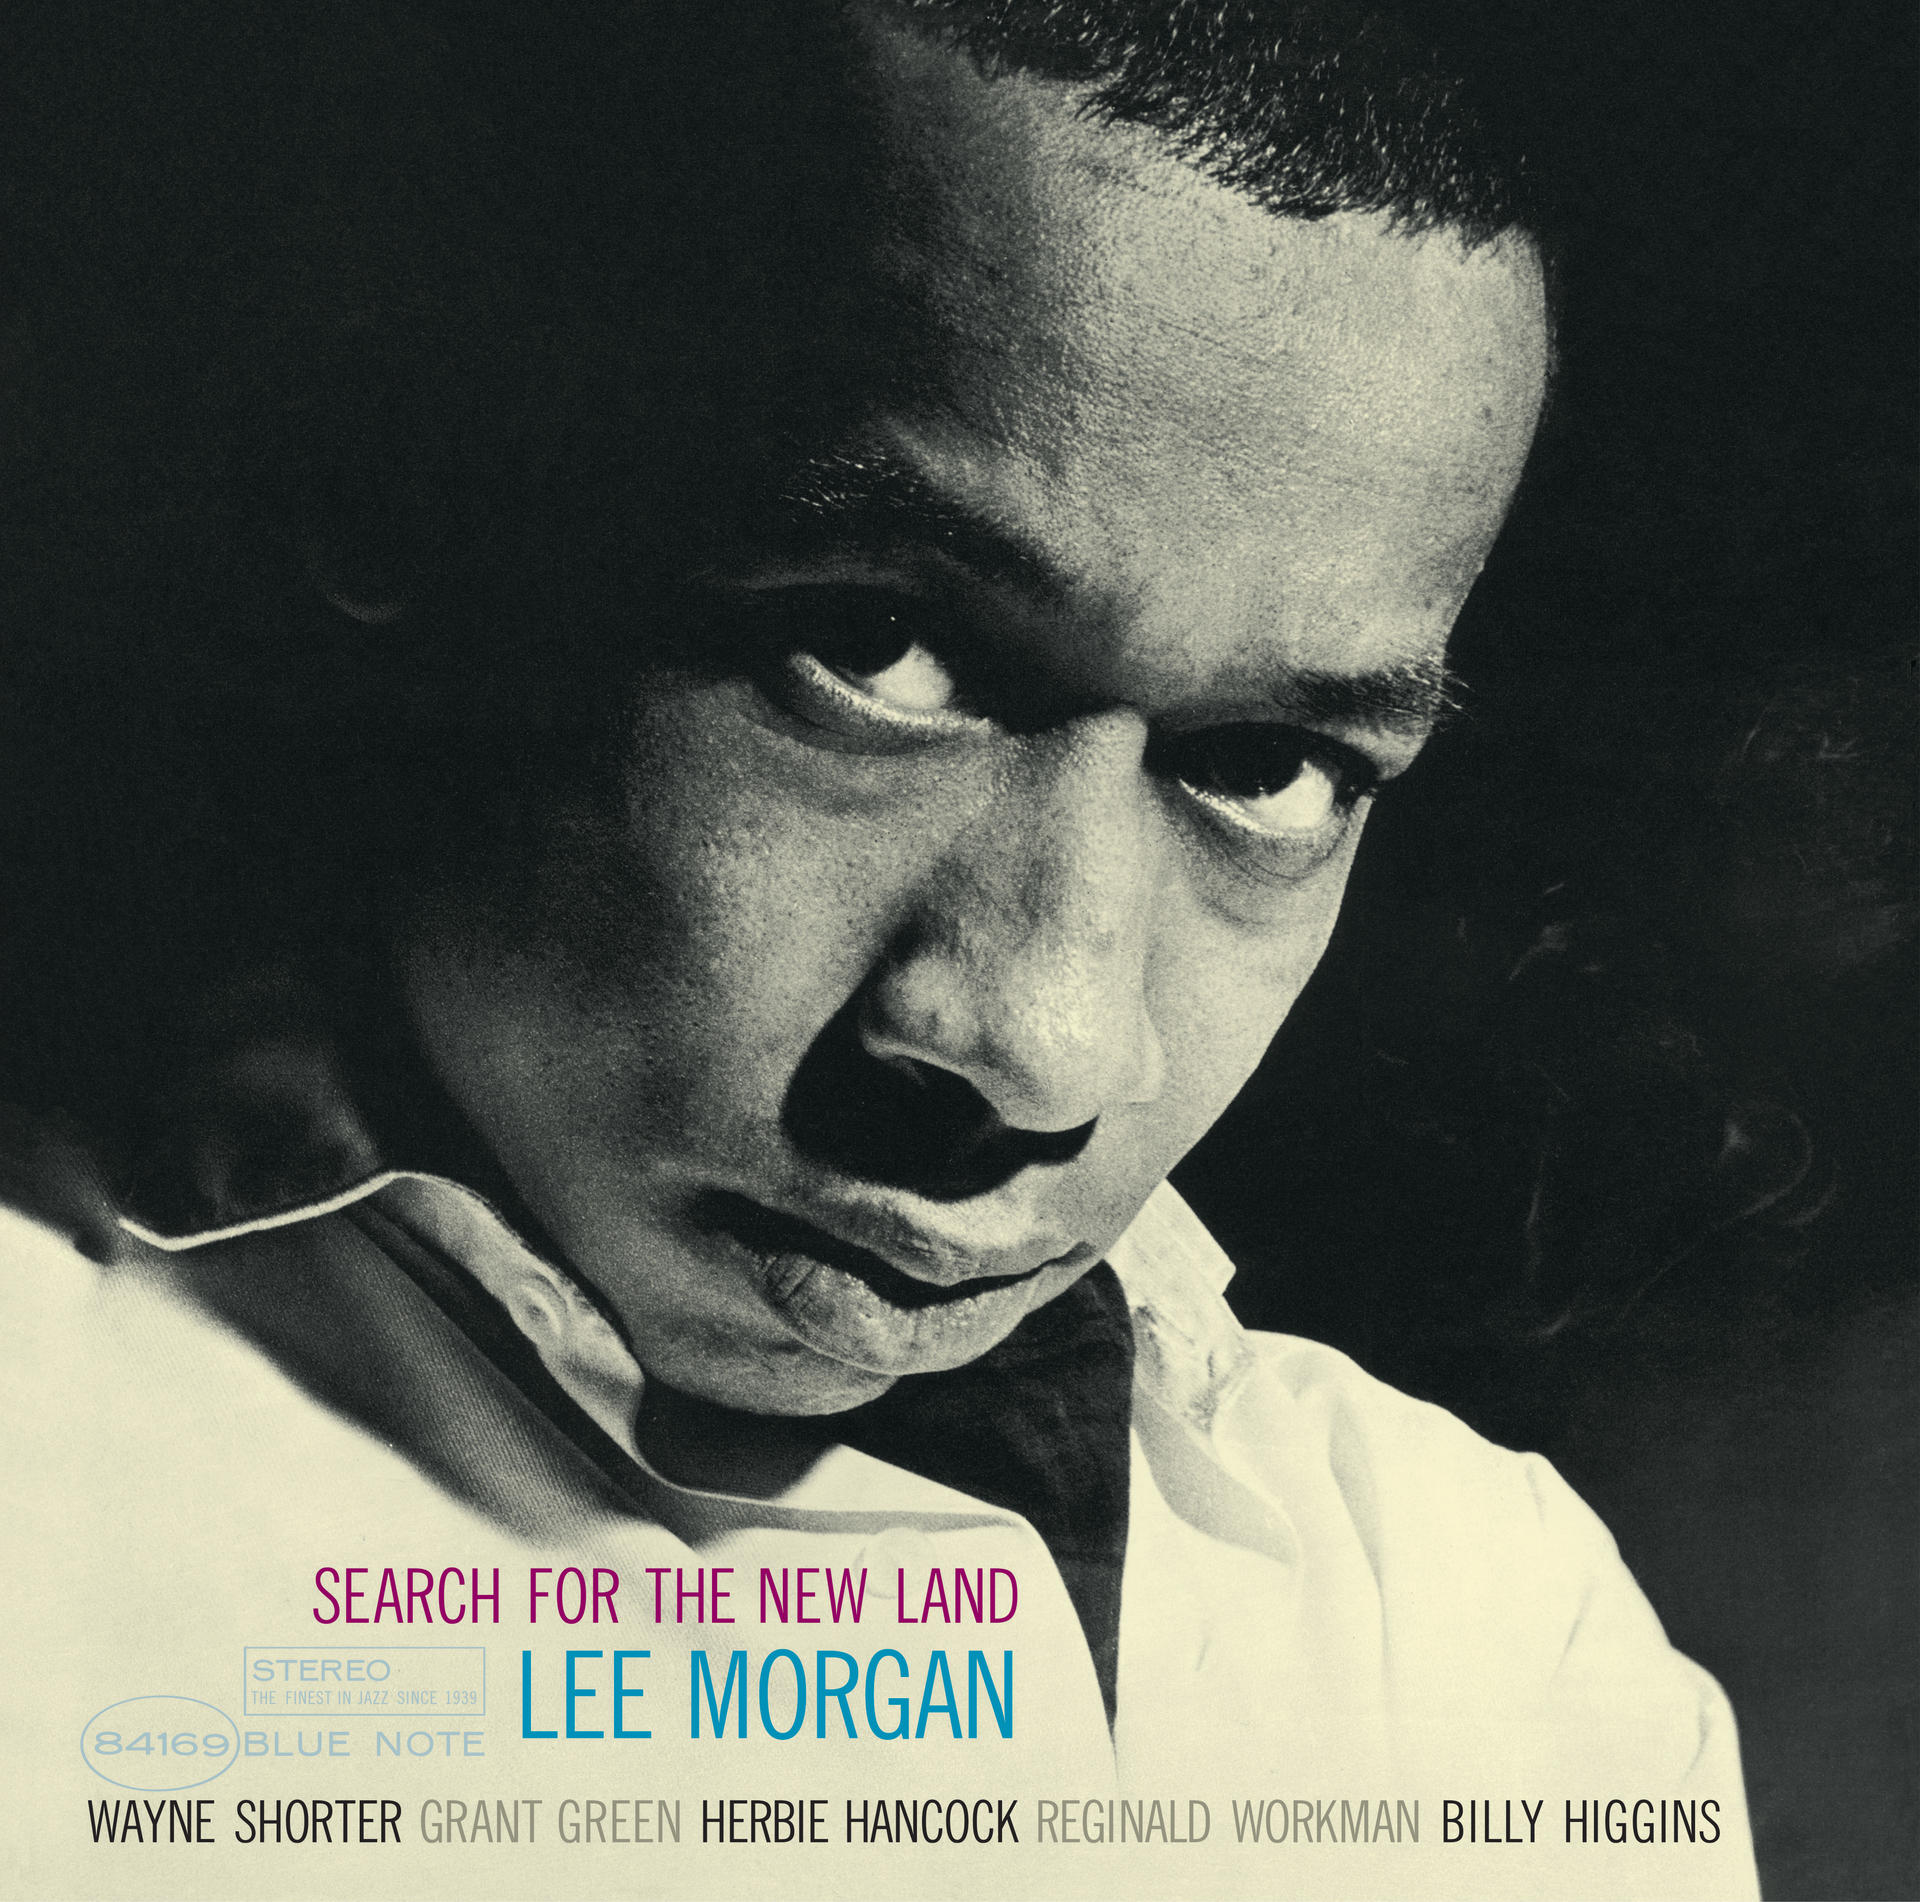 Land Morgan the Lee (Vinyl) - - for Search New